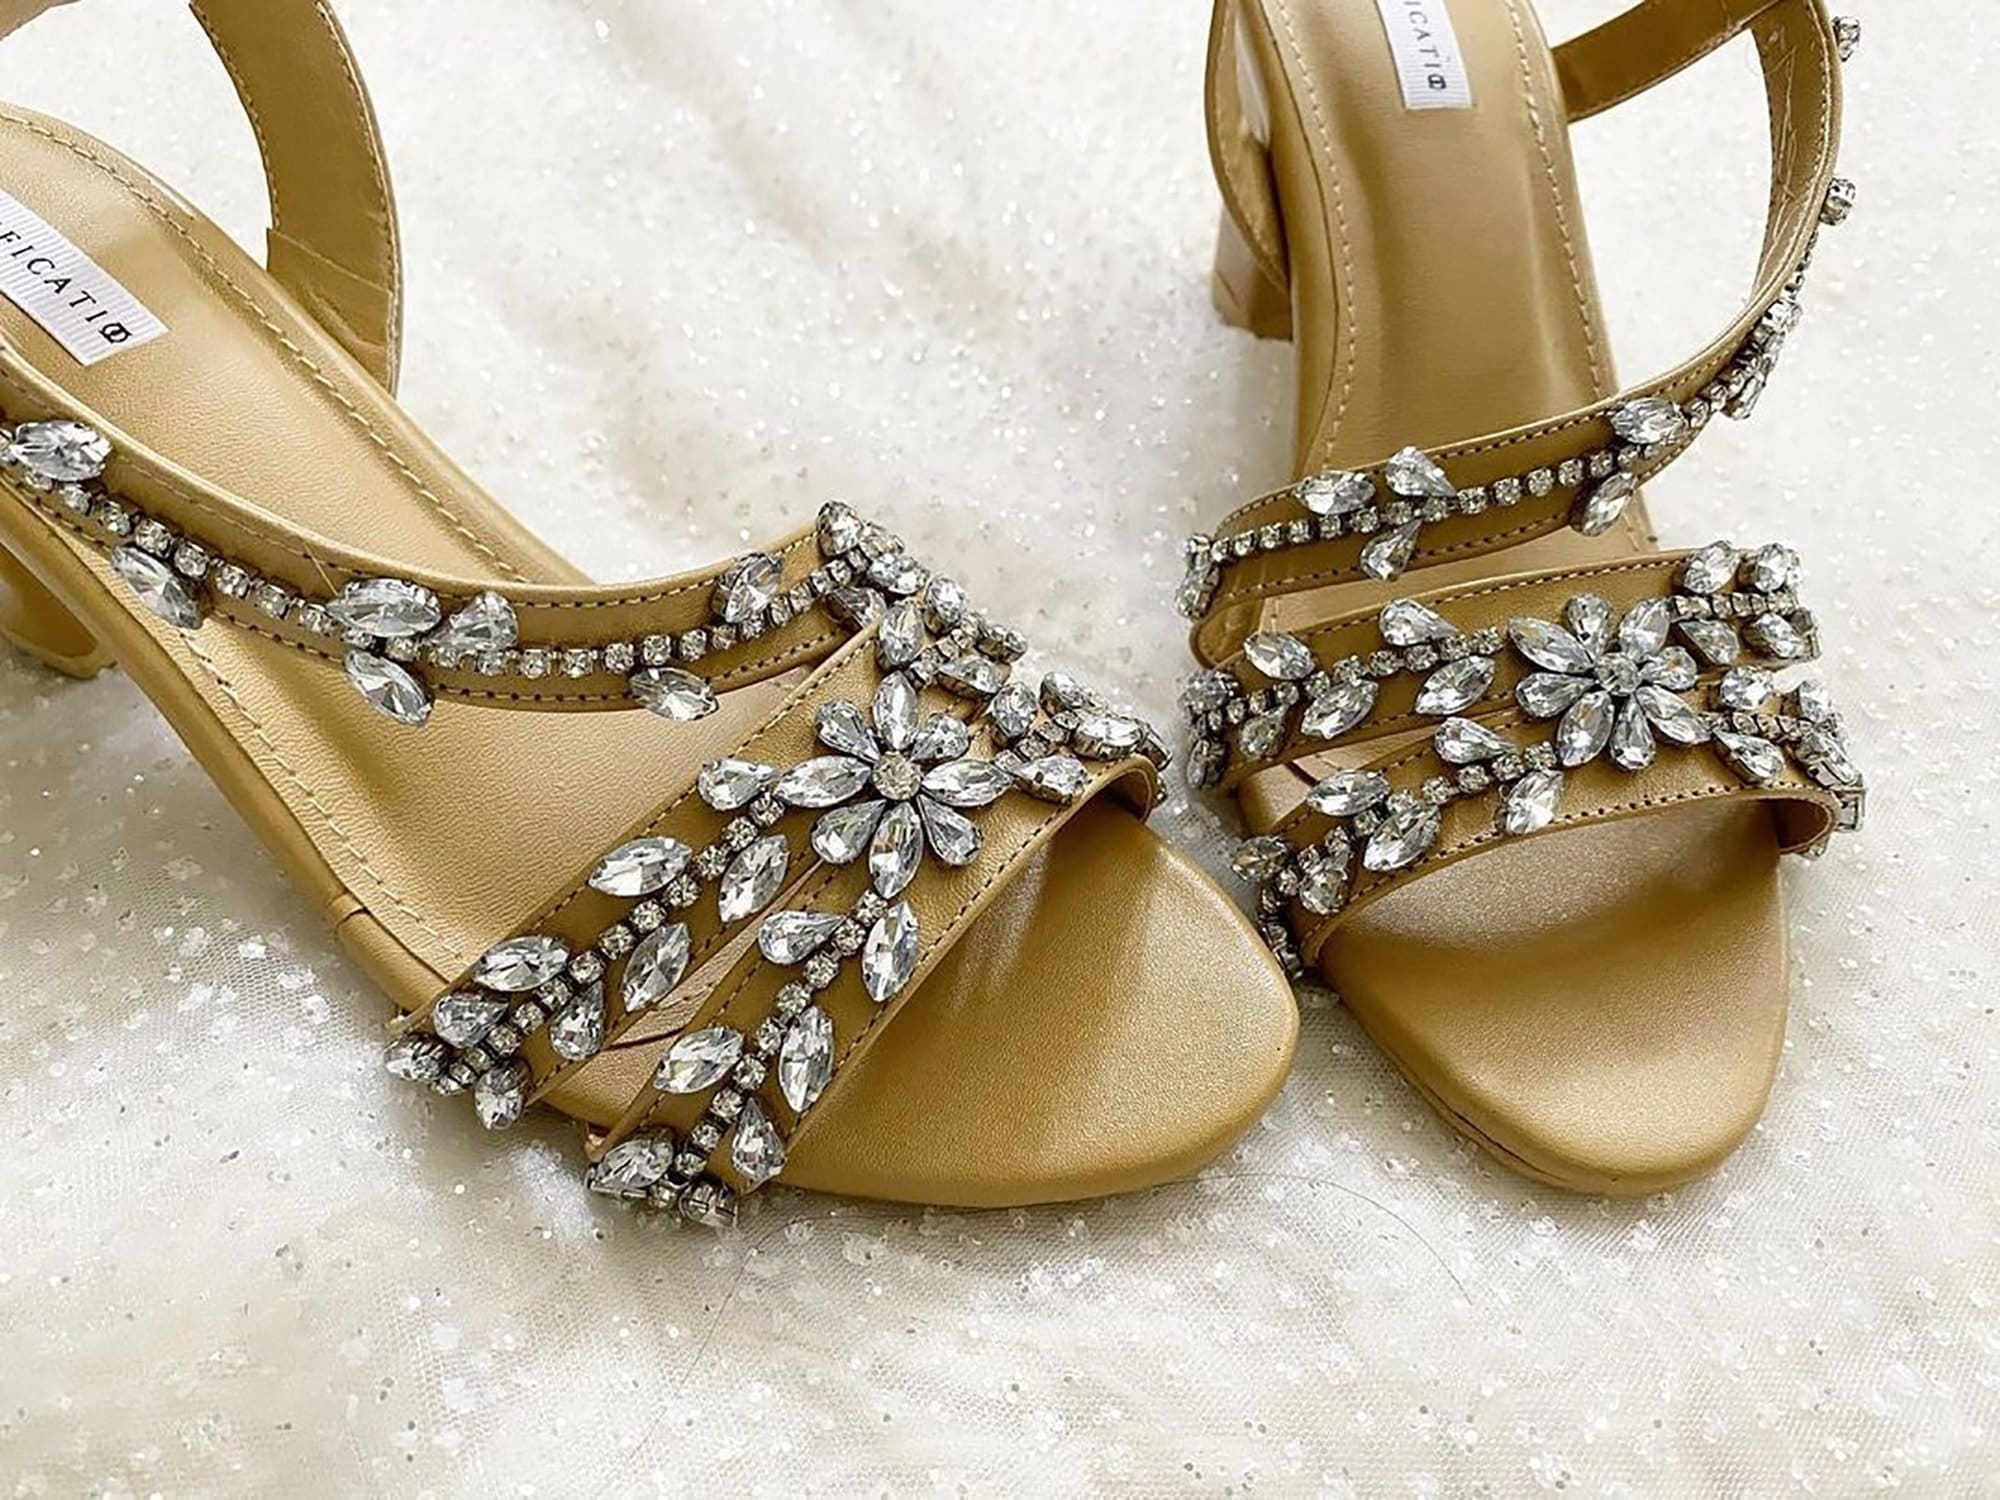 12 Beautiful and Comfortable Low Heel Wedding Shoes You Can Actually Wear  All Day | Wedding shoes heels, Sparkly wedding shoes, Wedding shoes low heel